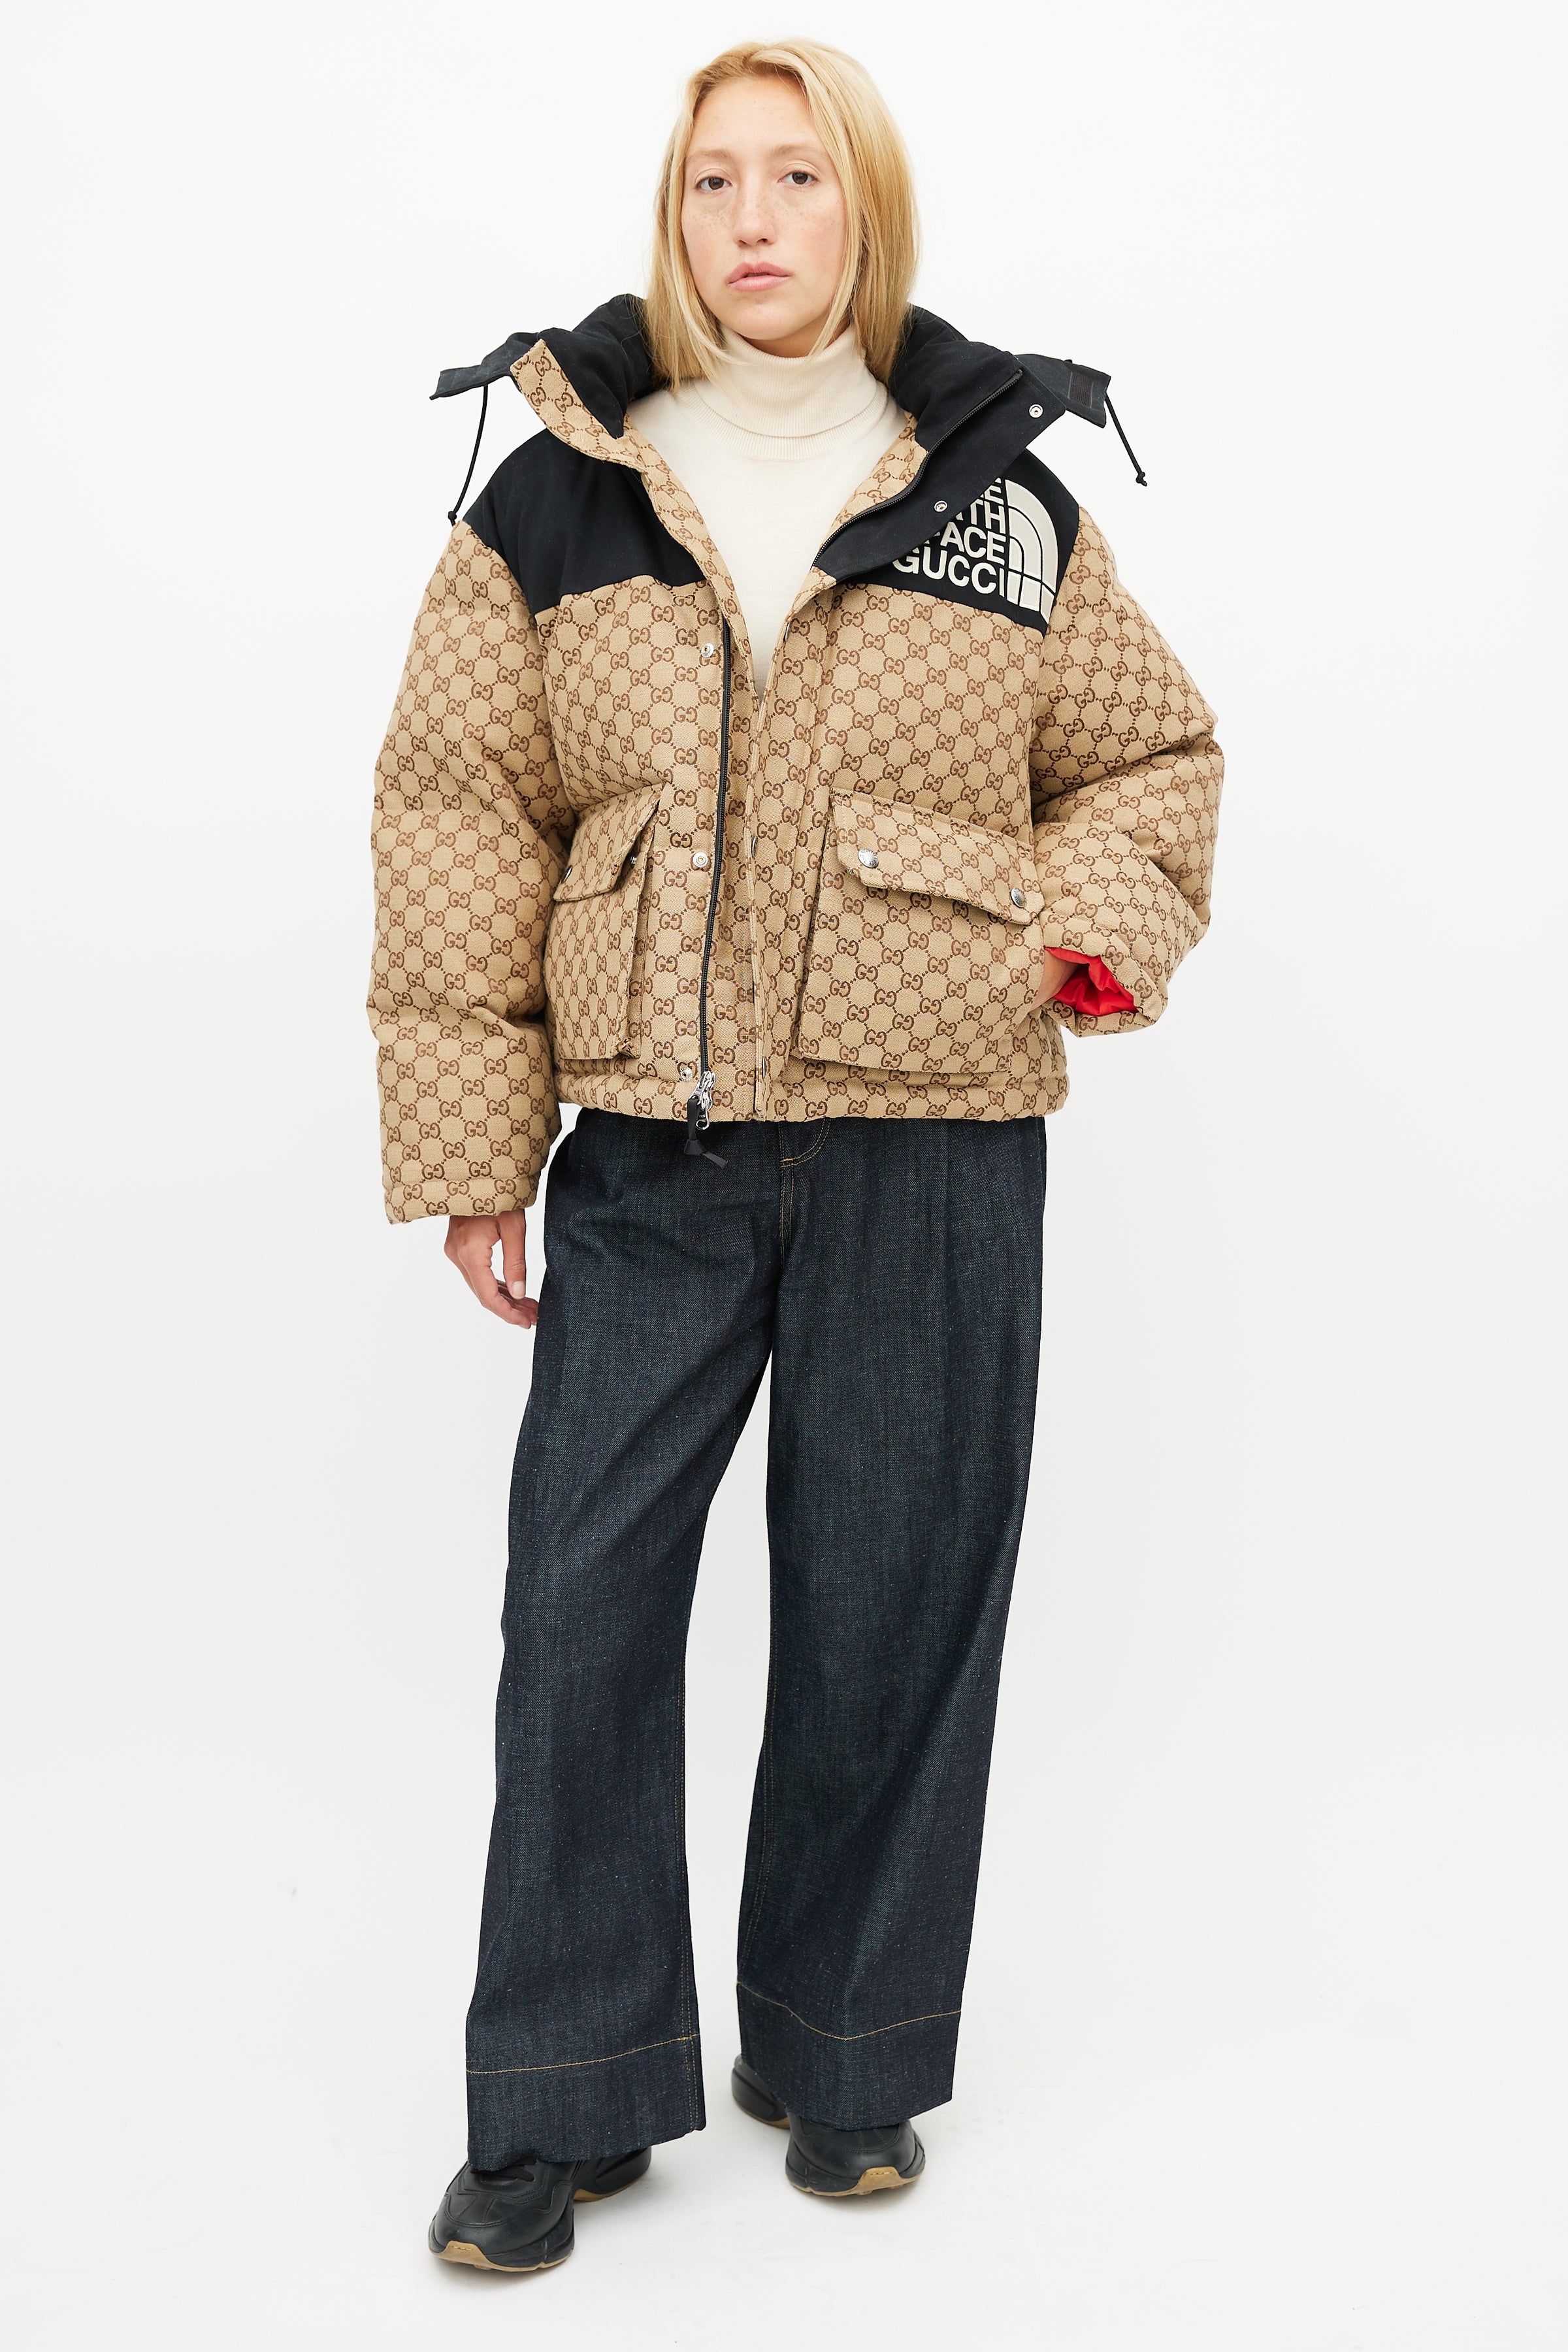 The North Face x Gucci down jacket in ivory and black